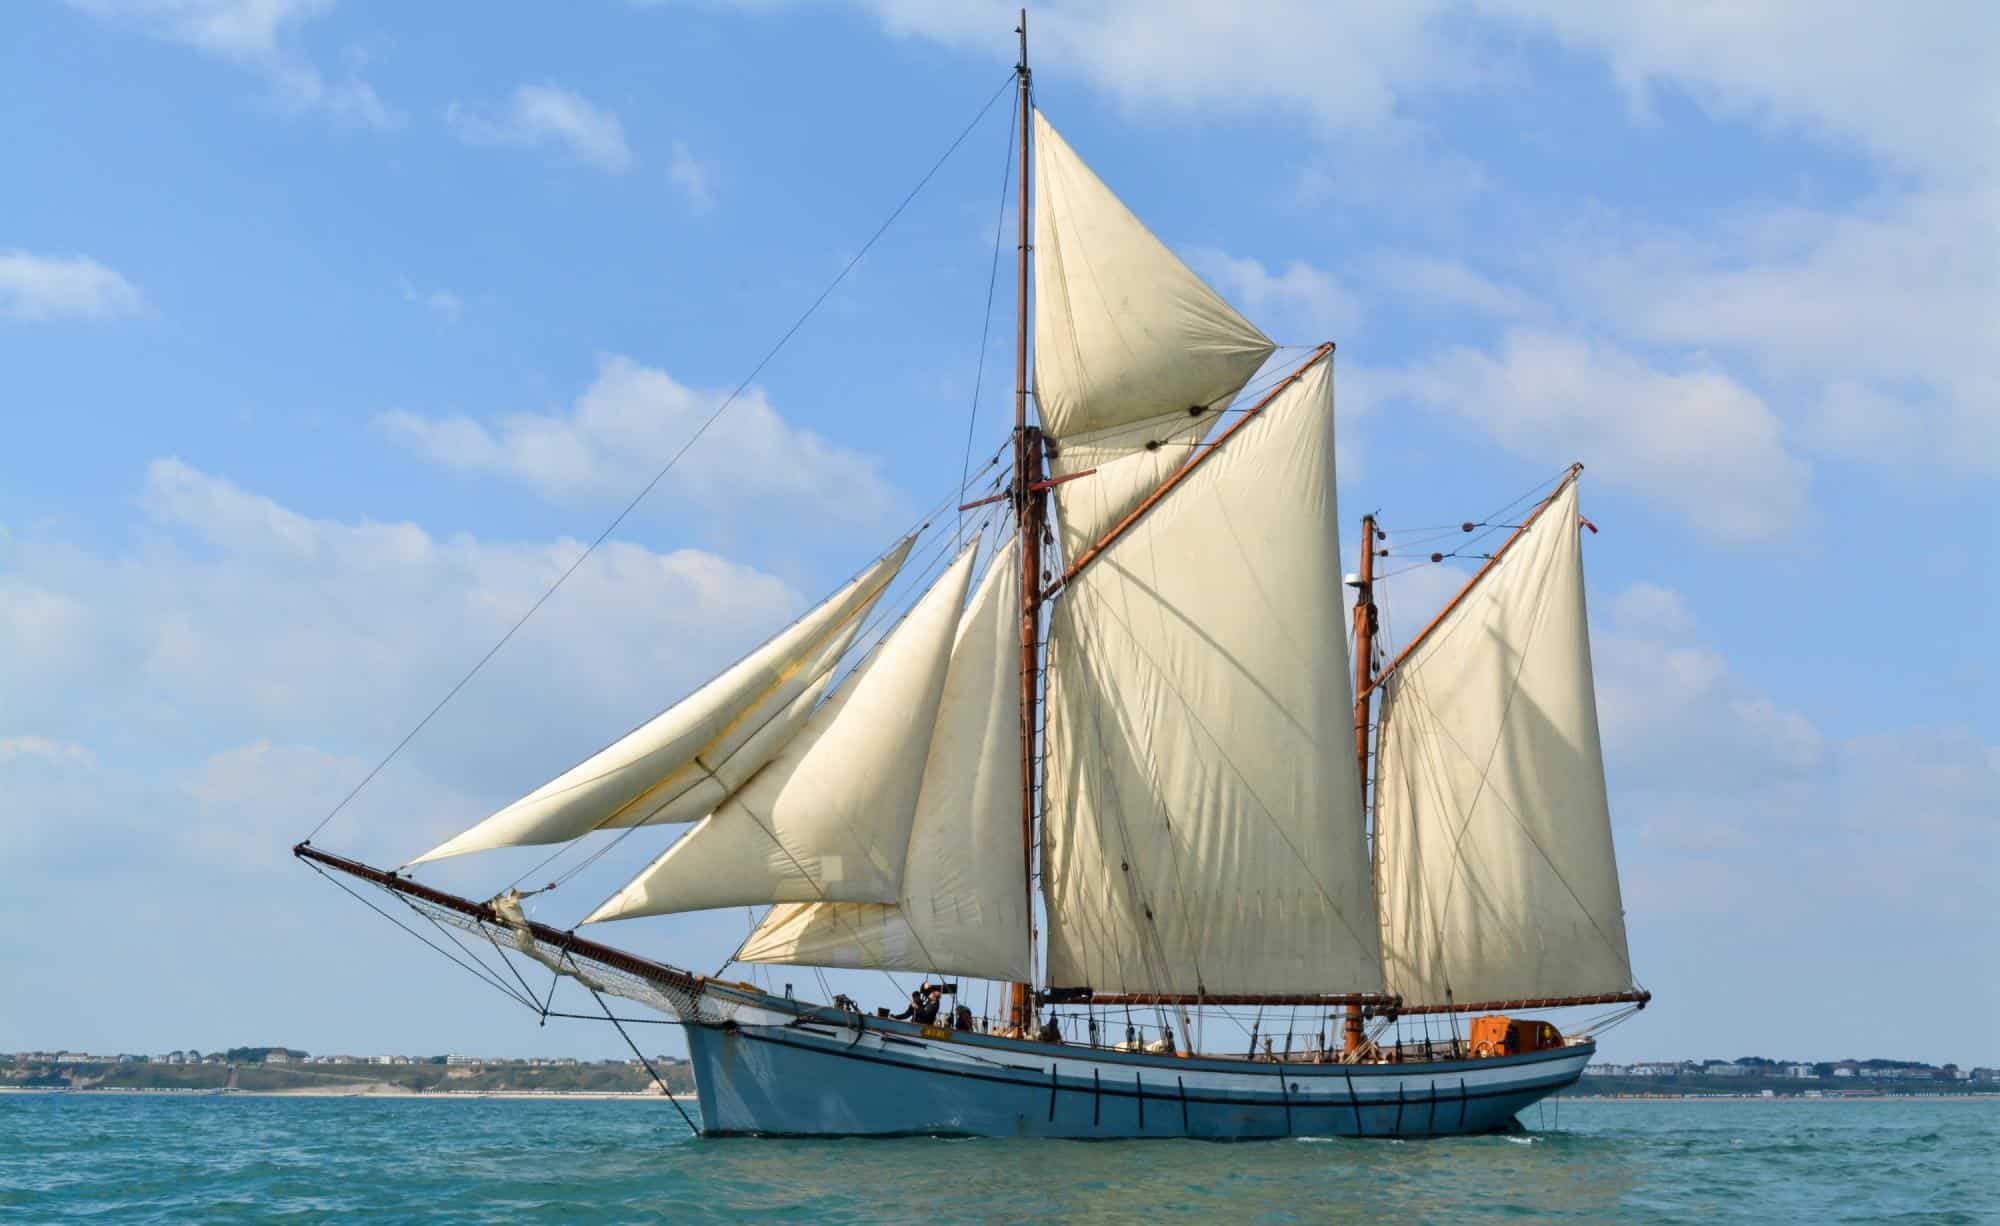 Adventure afloat and Explore Ashore with Classic Sailing in the Isles of Scilly